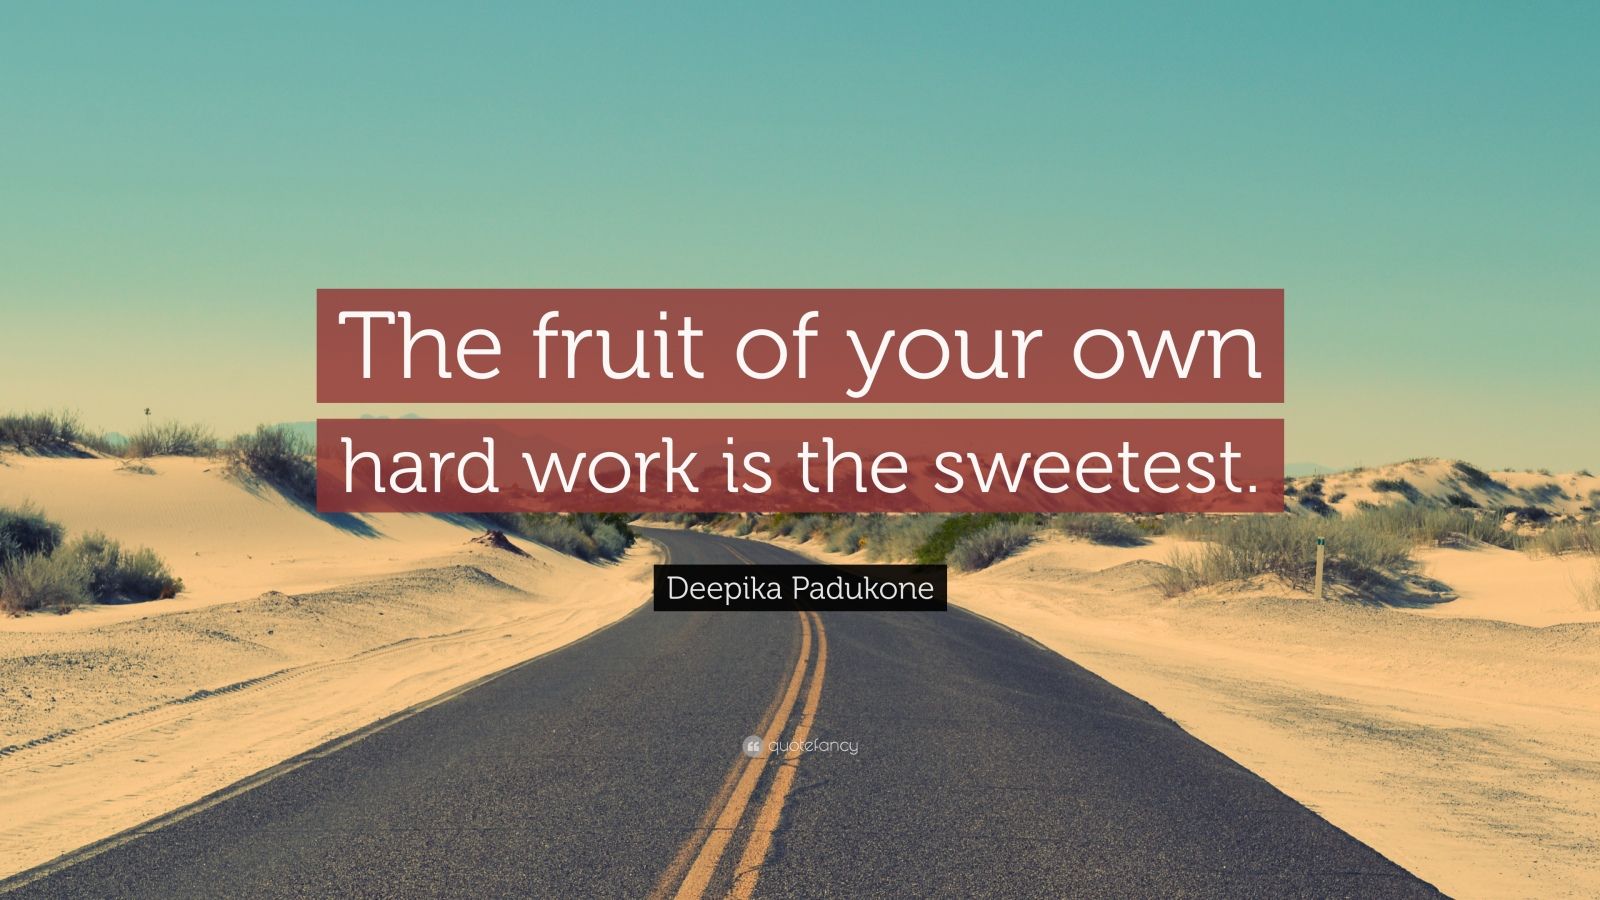 Deepika Padukone Quote: “The fruit of your own hard work is the sweetest.”